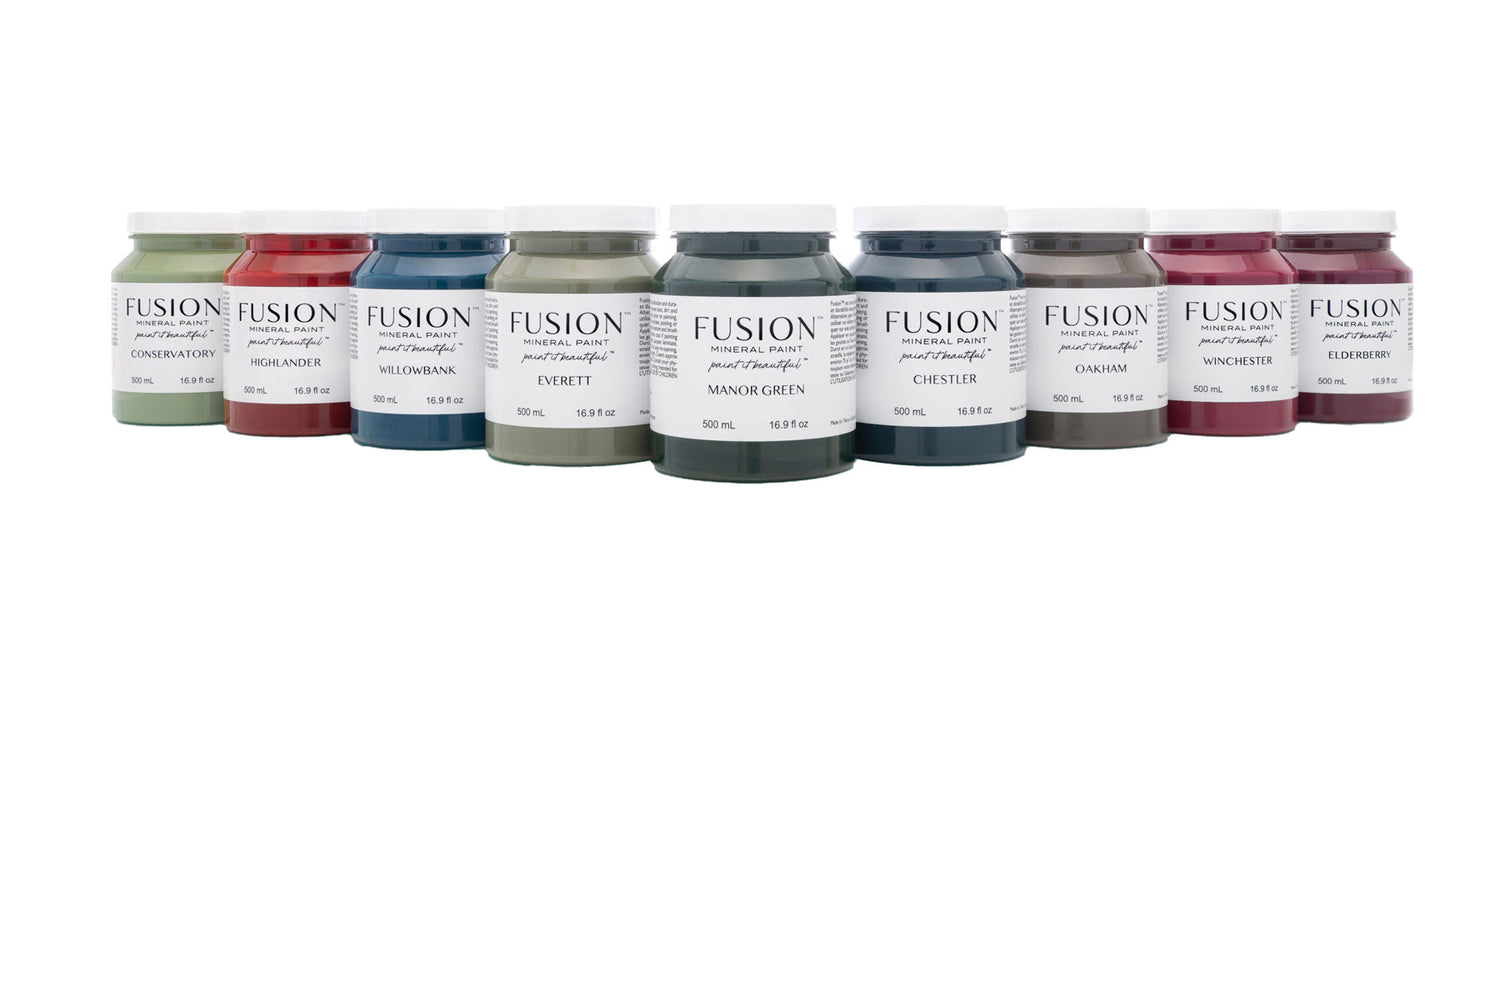 Fusion For Kids Rainbow Tempera Pack - Fusion Mineral Paint – Resurrected  Relics TN